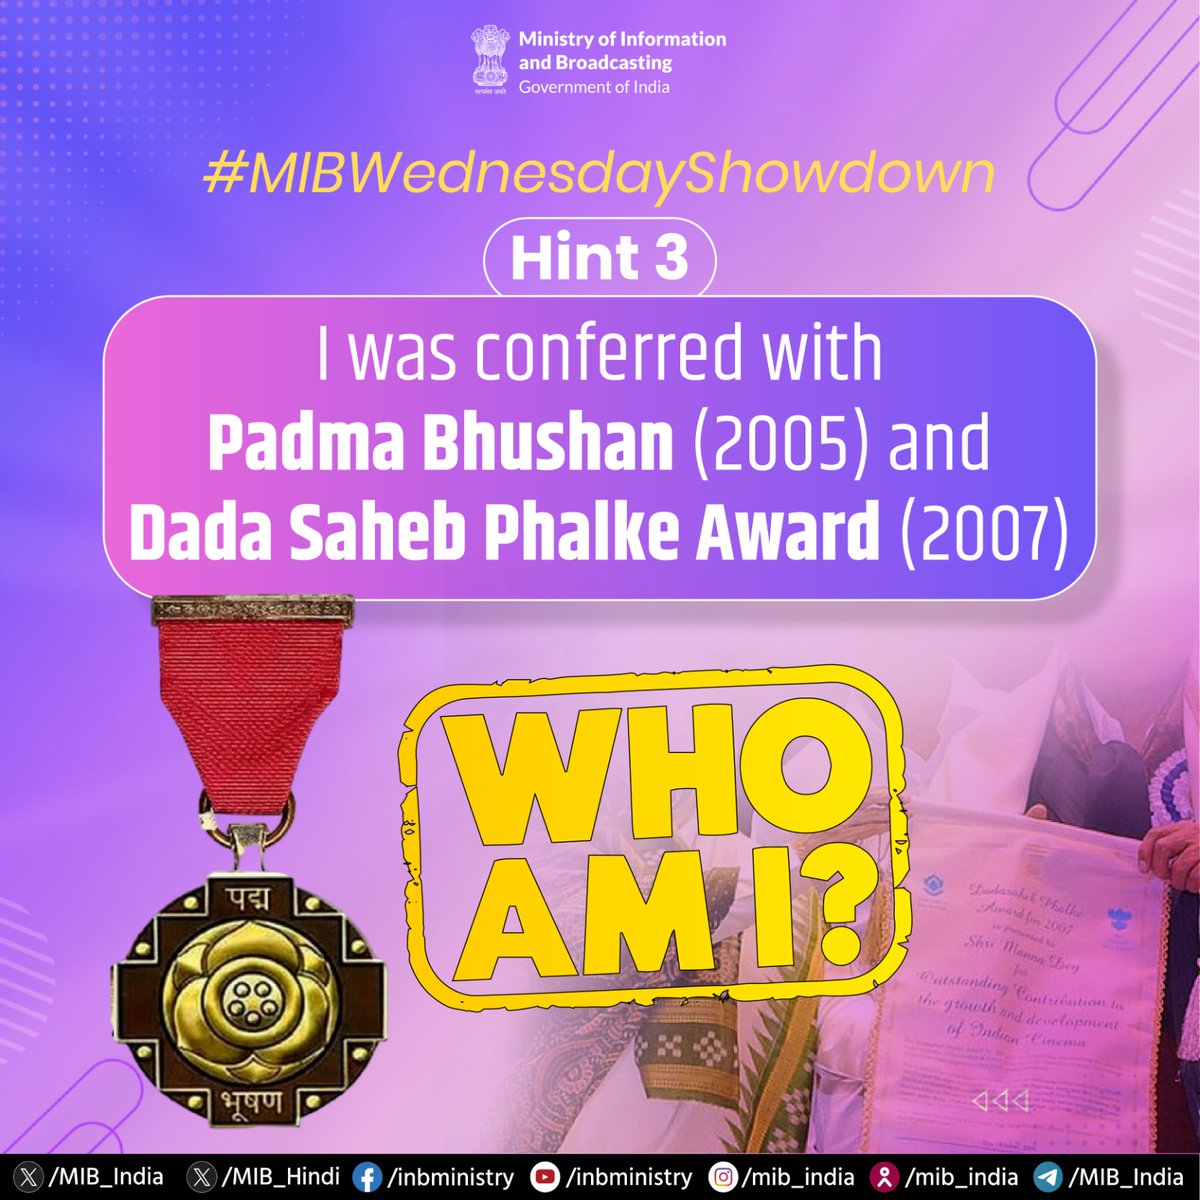 #MIBWednesdayShowdown is here! 👉🏻I was conferred with #PadmaBhushan (2005) and #DadaSahebPhalke Award (2007) Who am I? Take a guess and do share your response in the comment section below!💬 @PIB_India @DDNewslive @airnewsalerts